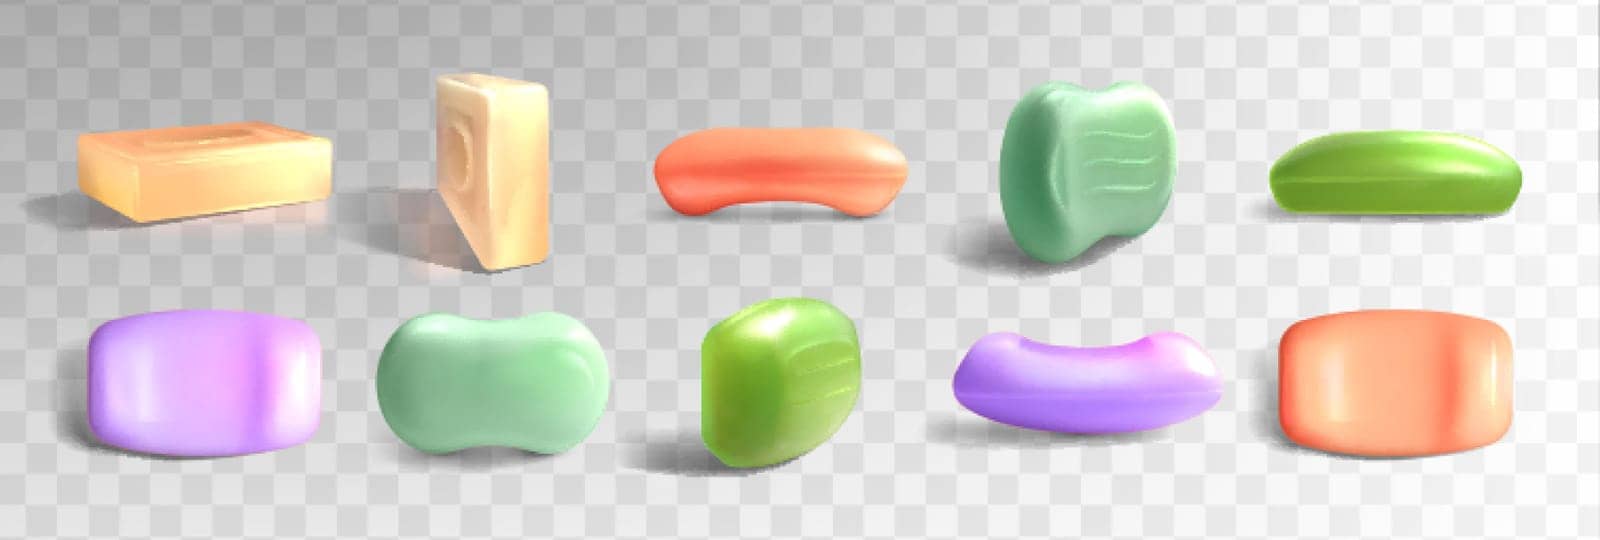 3d realistic soap bars different shapes and colors by Redgreystock